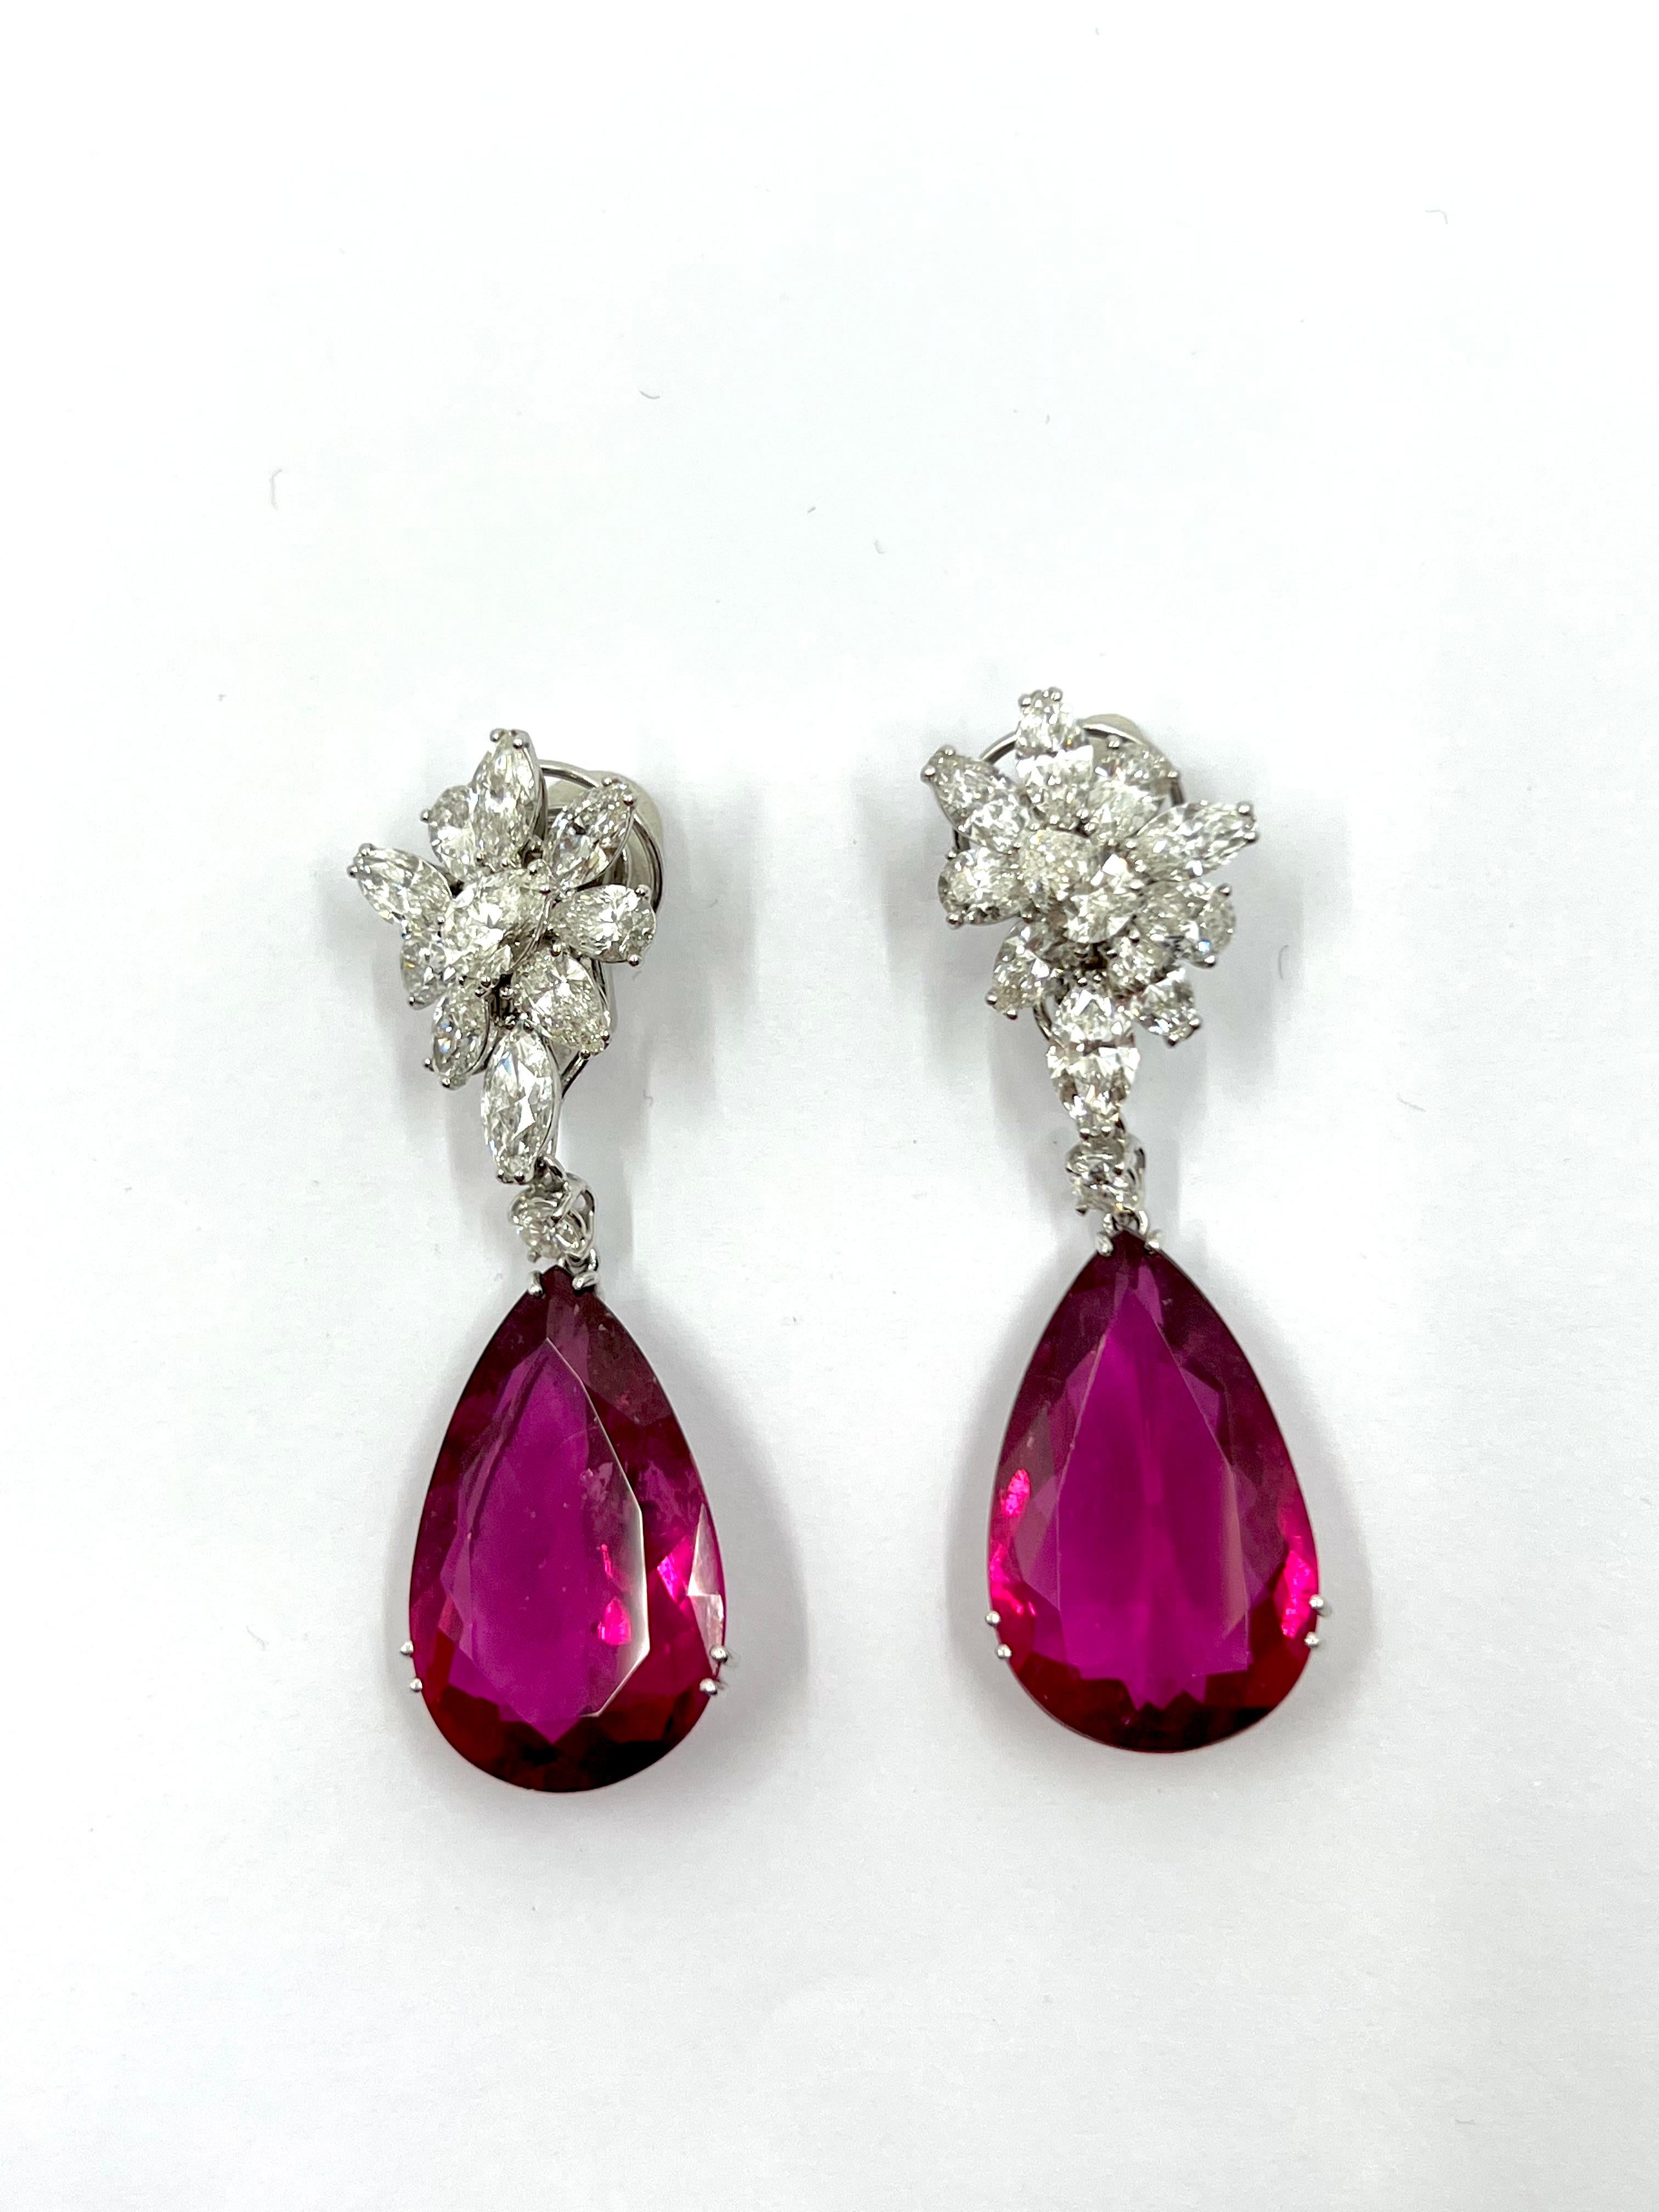 Earrings in white gold set with diamonds, tourmaline, topaze, morganite, pearls For Sale 1